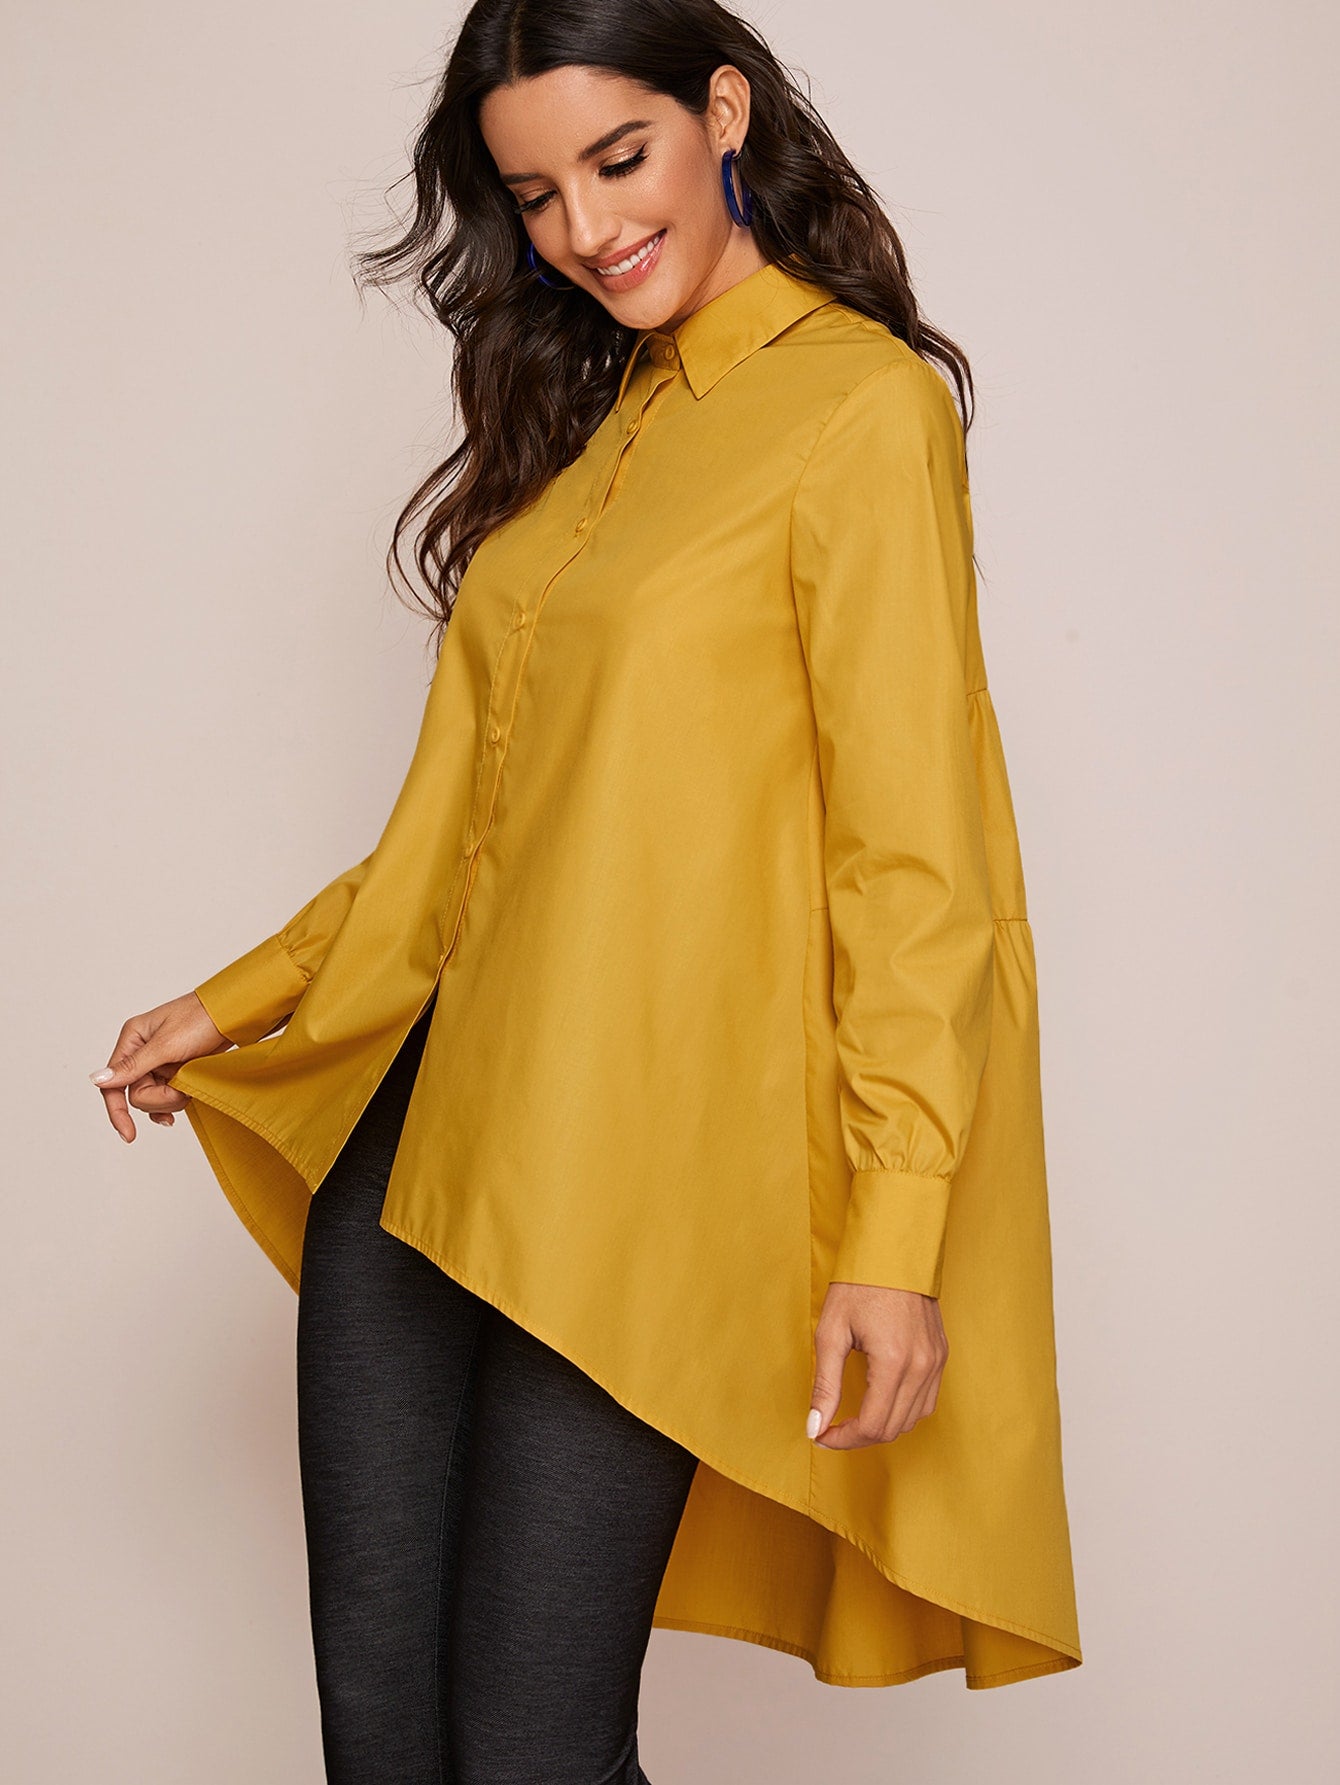 High Low Tiered Back Blouse